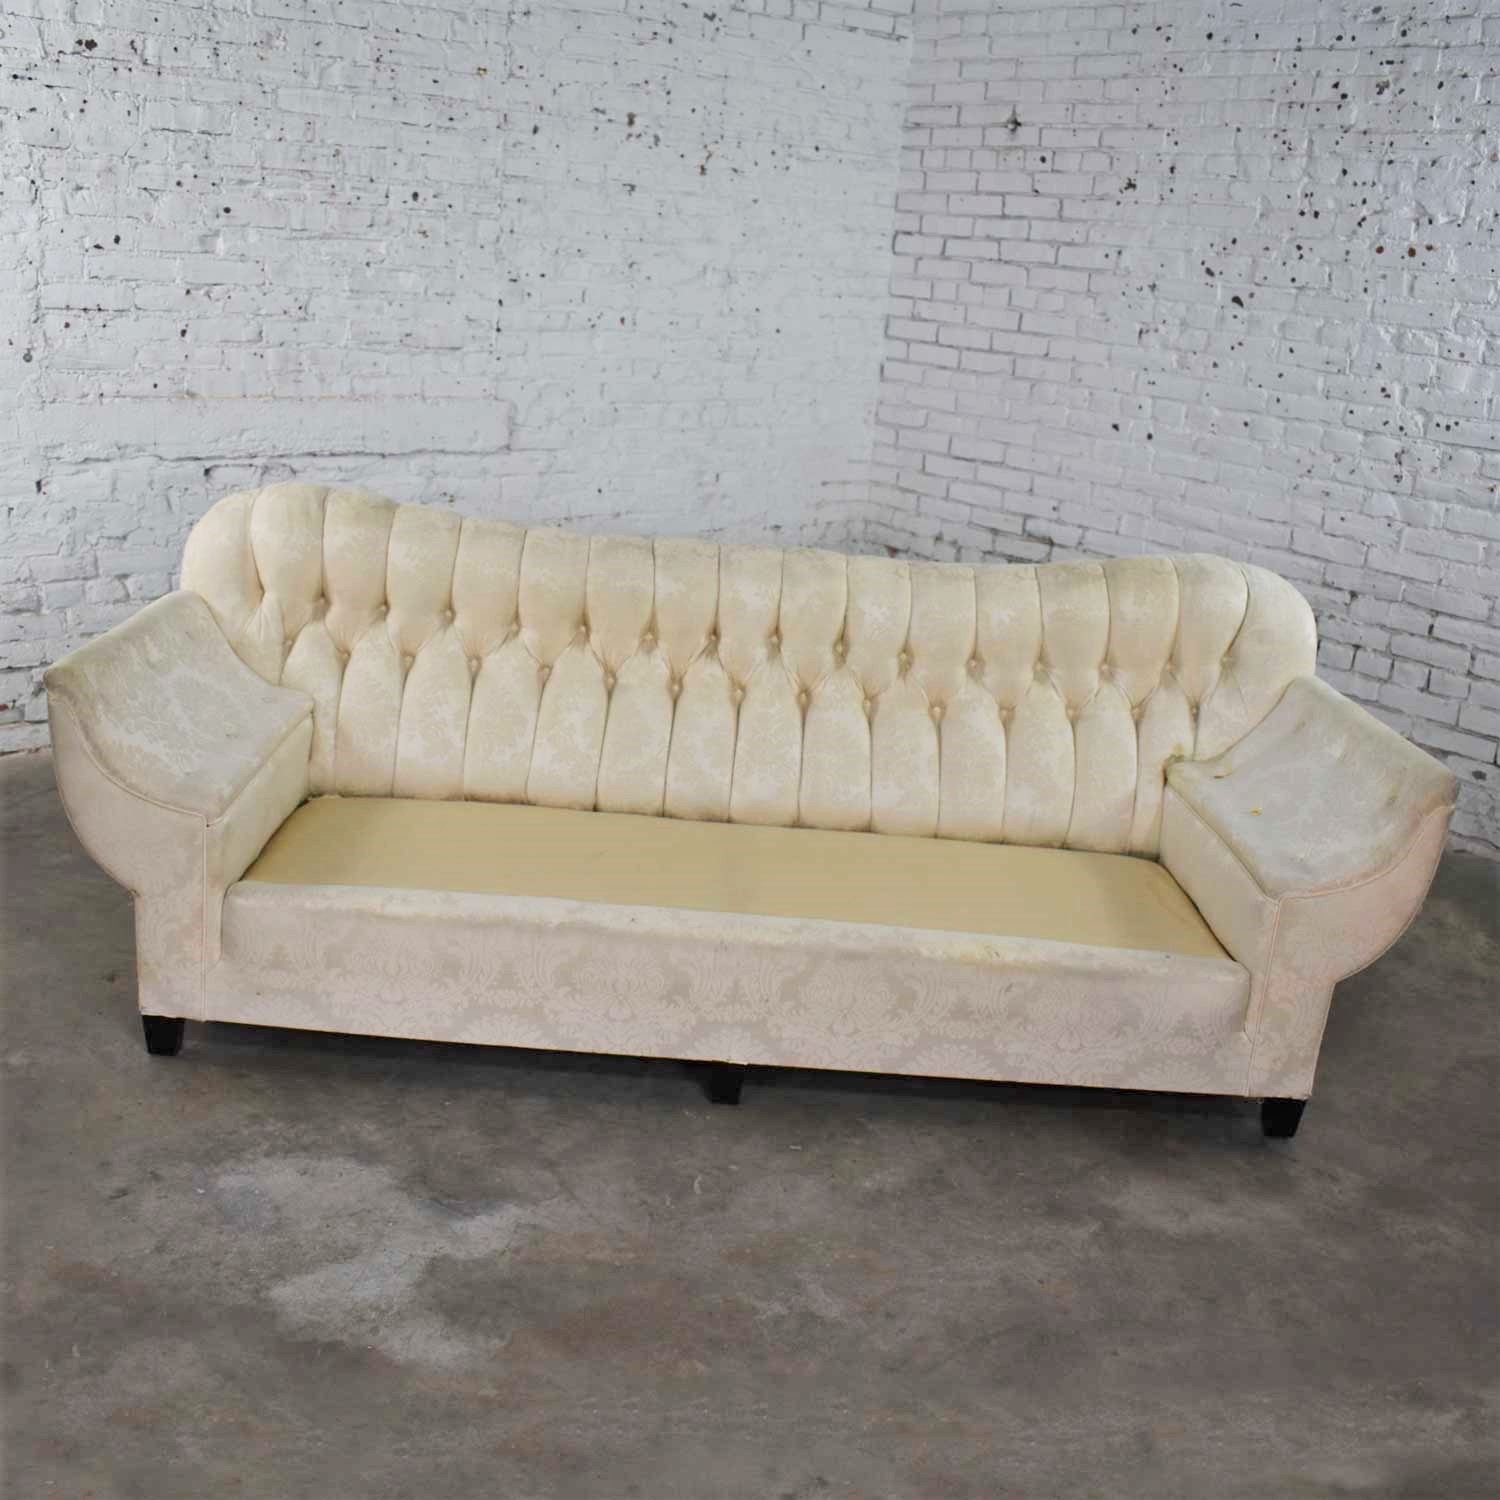 Vintage Art Deco Hollywood Regency Sofa with Tufted Back and Concave Pillowed Arms